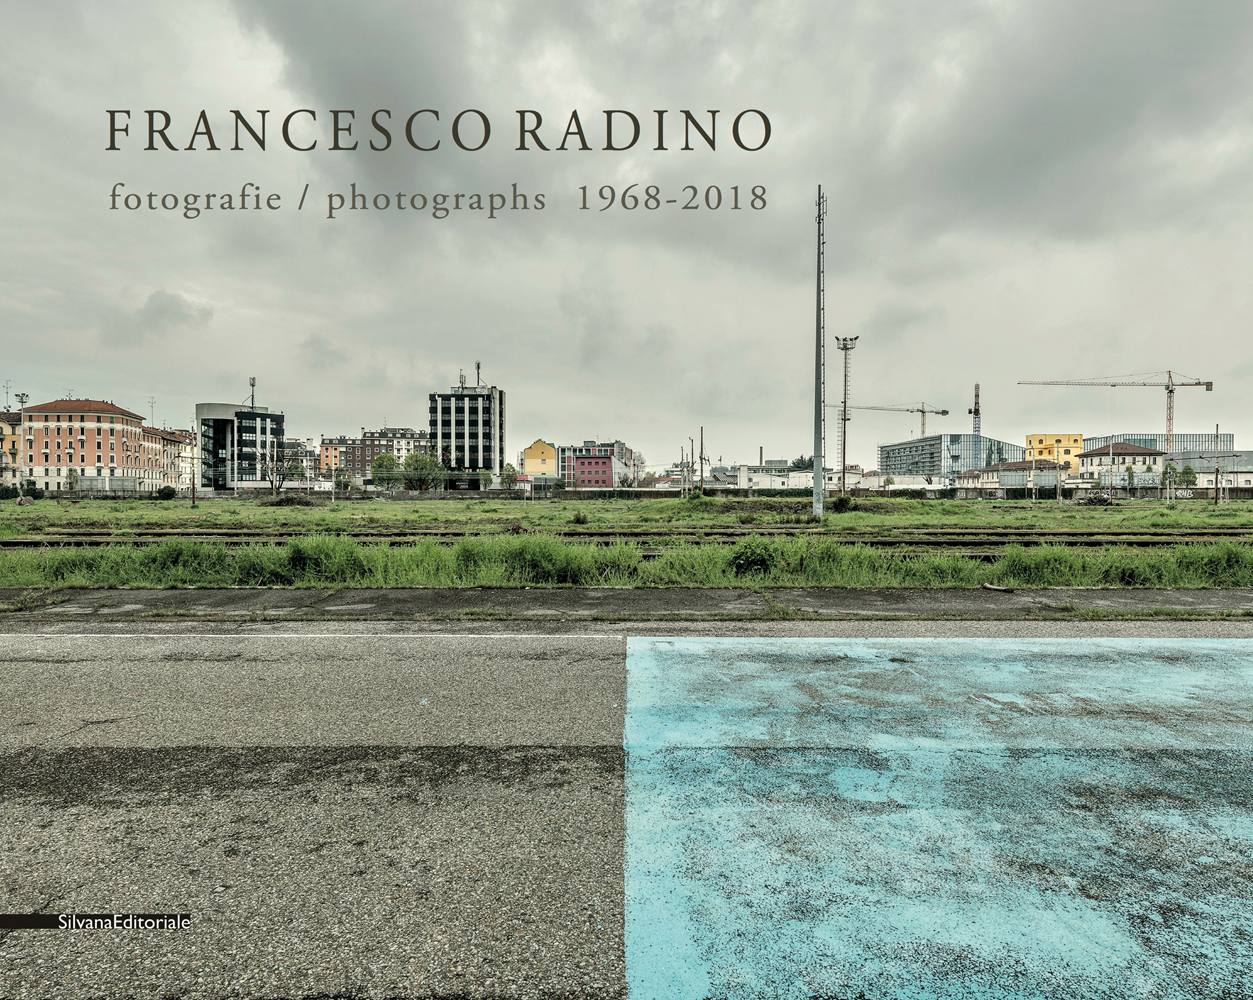 Urban landscape with road, train track, high rise buildings and machine cranes, FRANCESCO RADINO fotographie/photographs 1968-2018 in green font above.